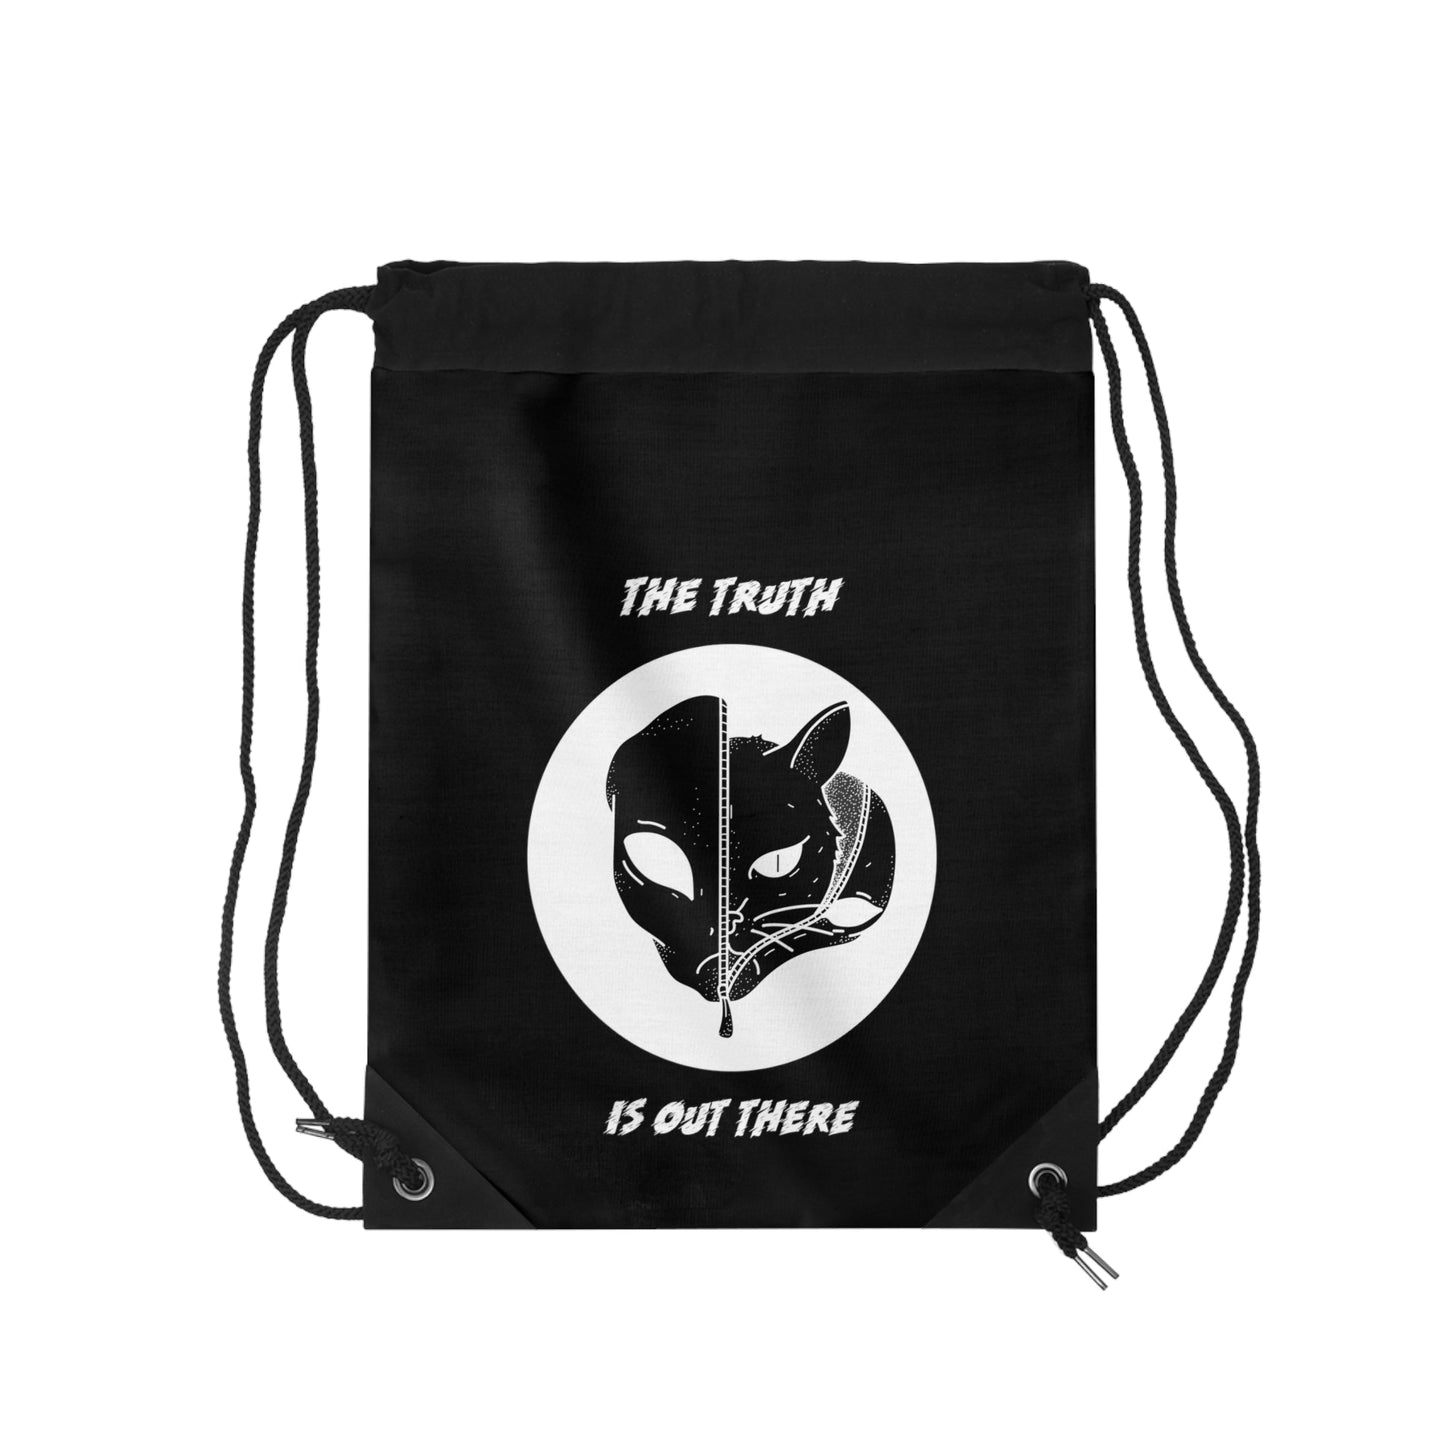 CrazyYetiClothing, CYC, The Truth Is Out There (Black, Drawstring Bag 19"x14.5"), Bags